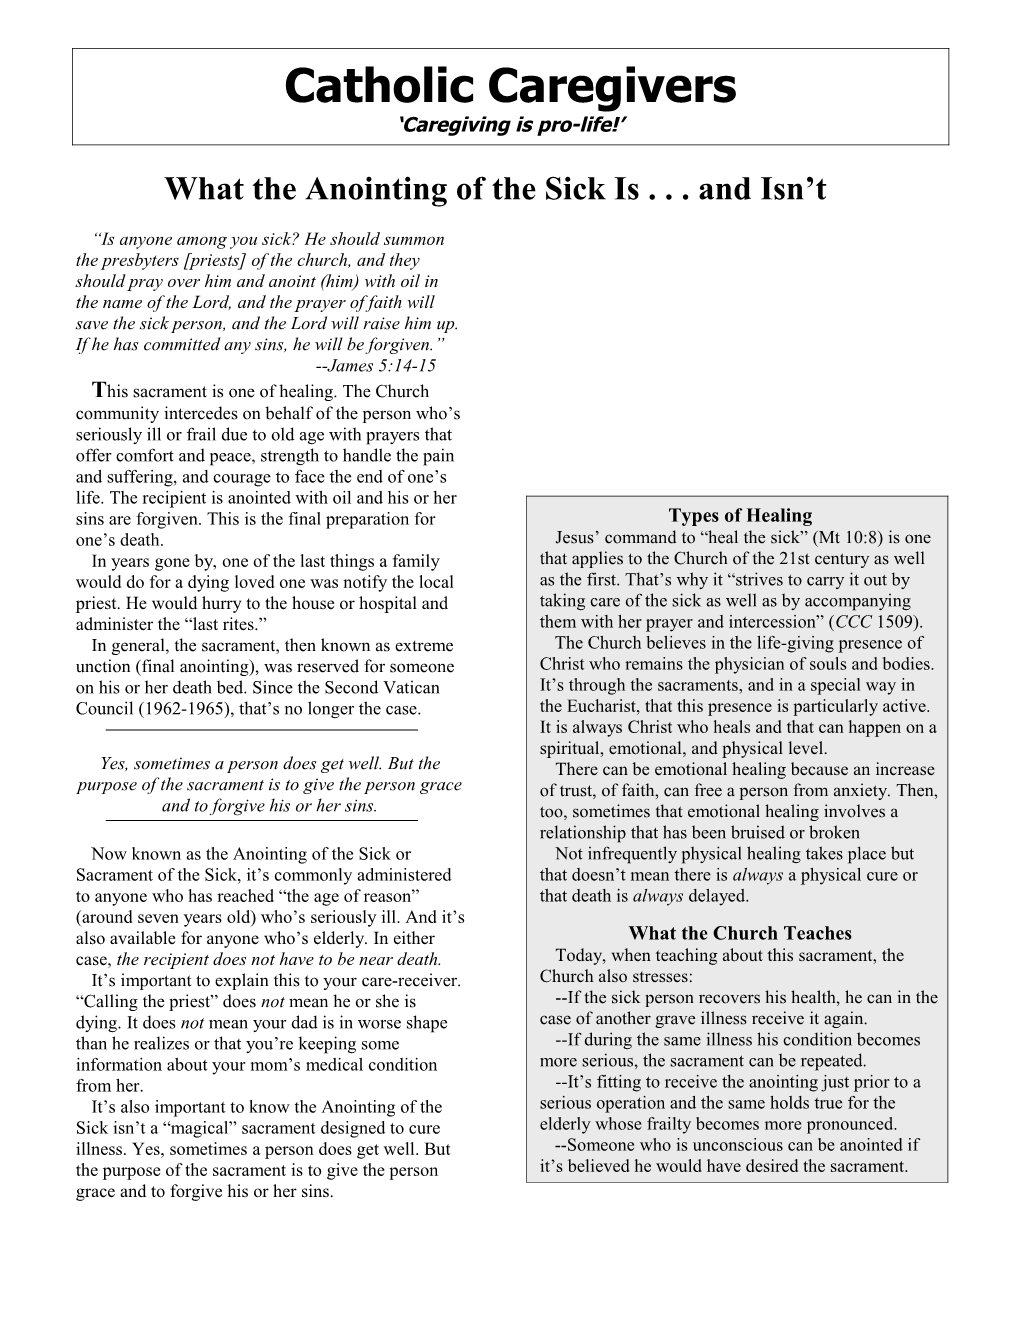 What the Anointing of the Sick Is . . . and Isn T